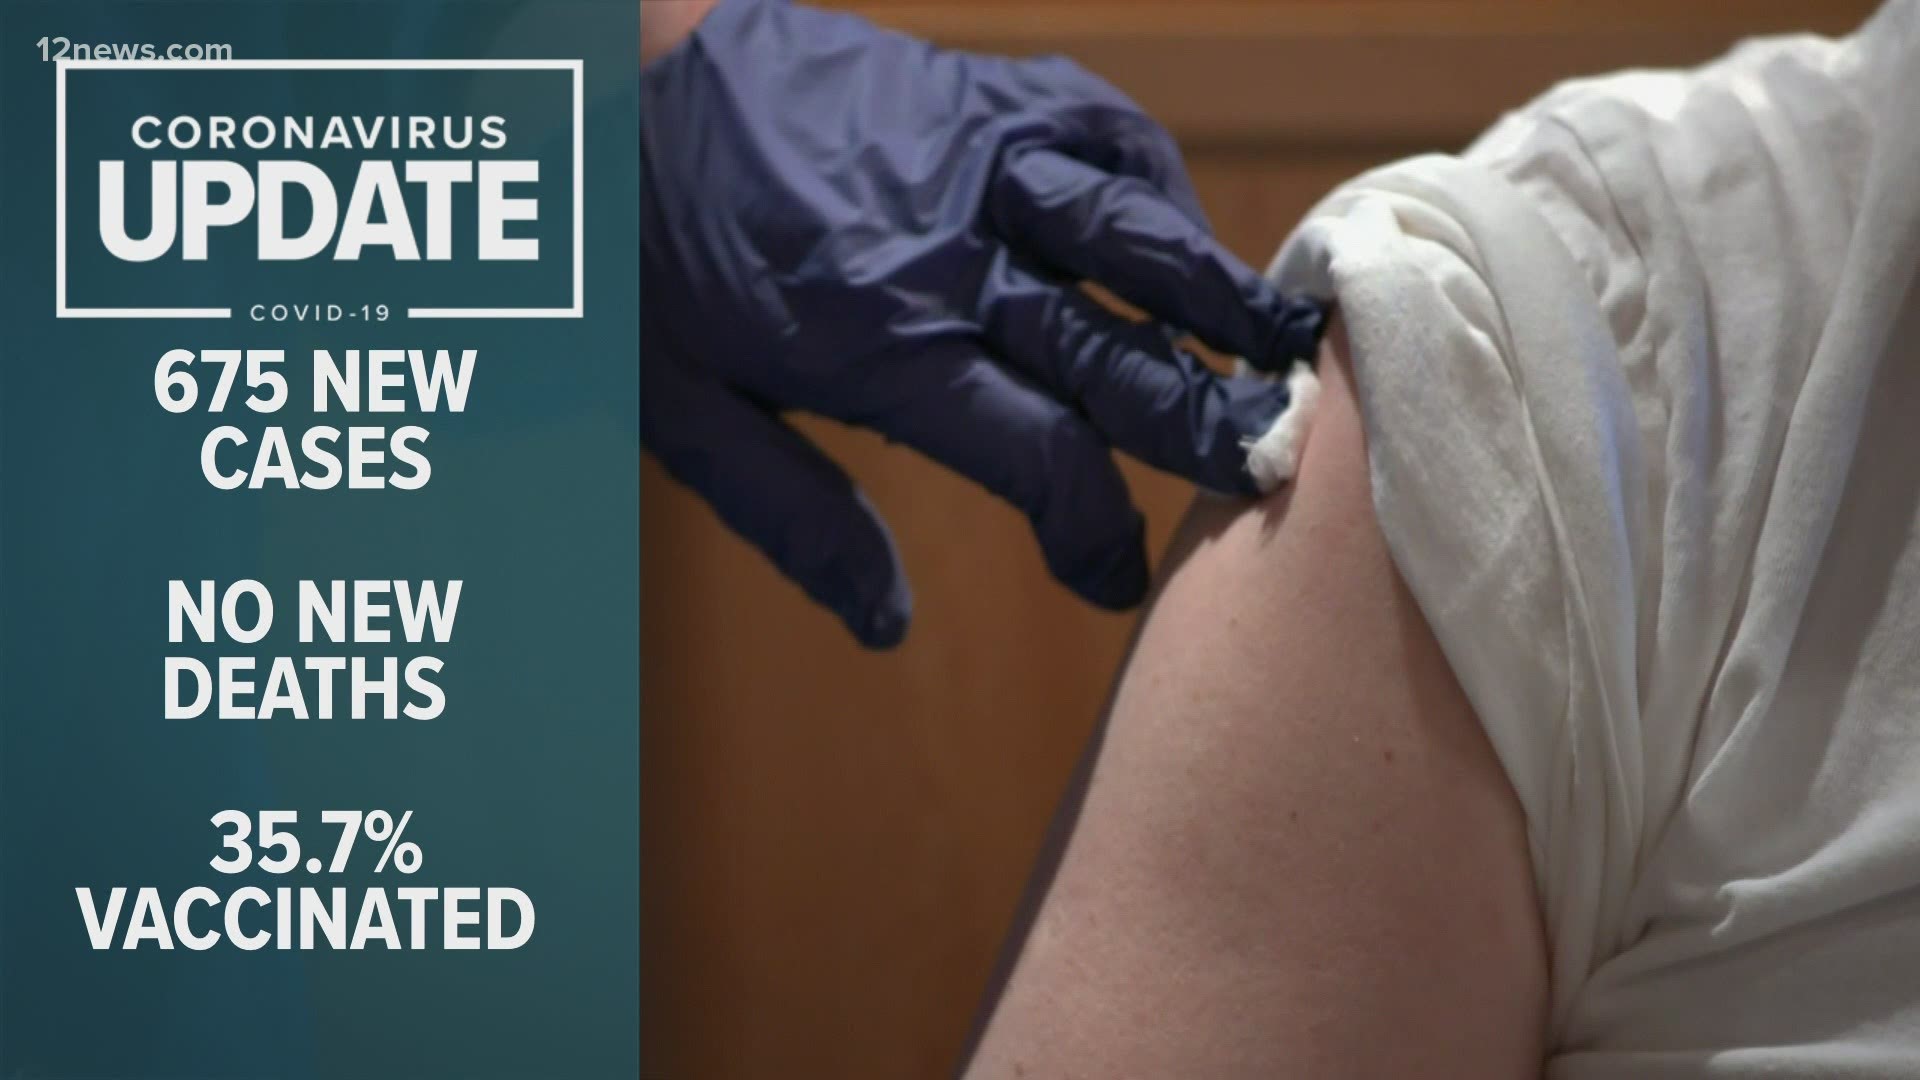 We continue to track the number of coronavirus cases in Arizona. Rachel Cole has the latest news and updates for April 12, 2021.